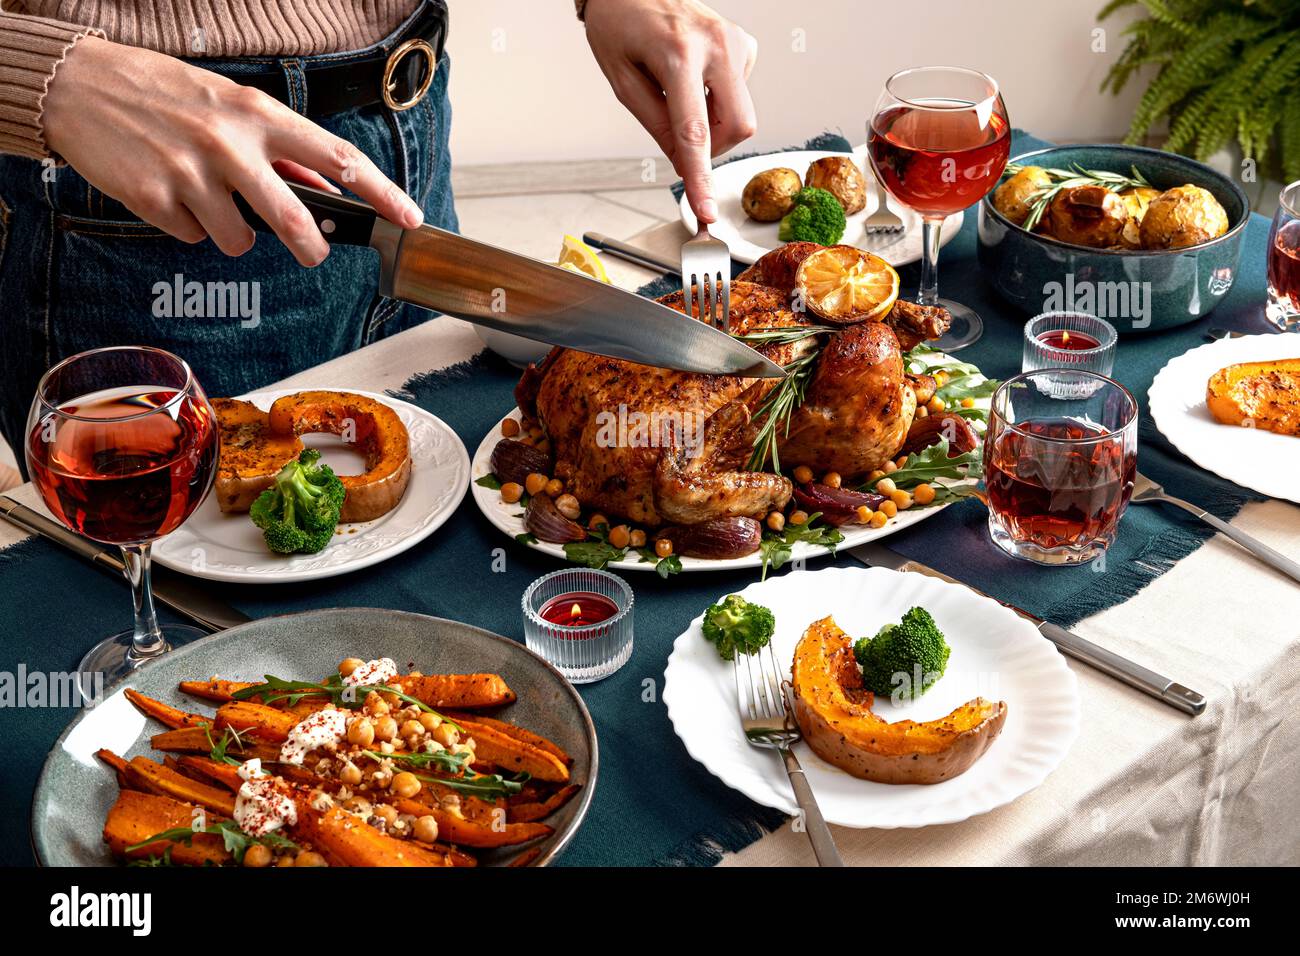 People celebrating Thanksgiving Day. Woman cutting meat for family and friends on table. Traditional holiday stuffed baked chick Stock Photo